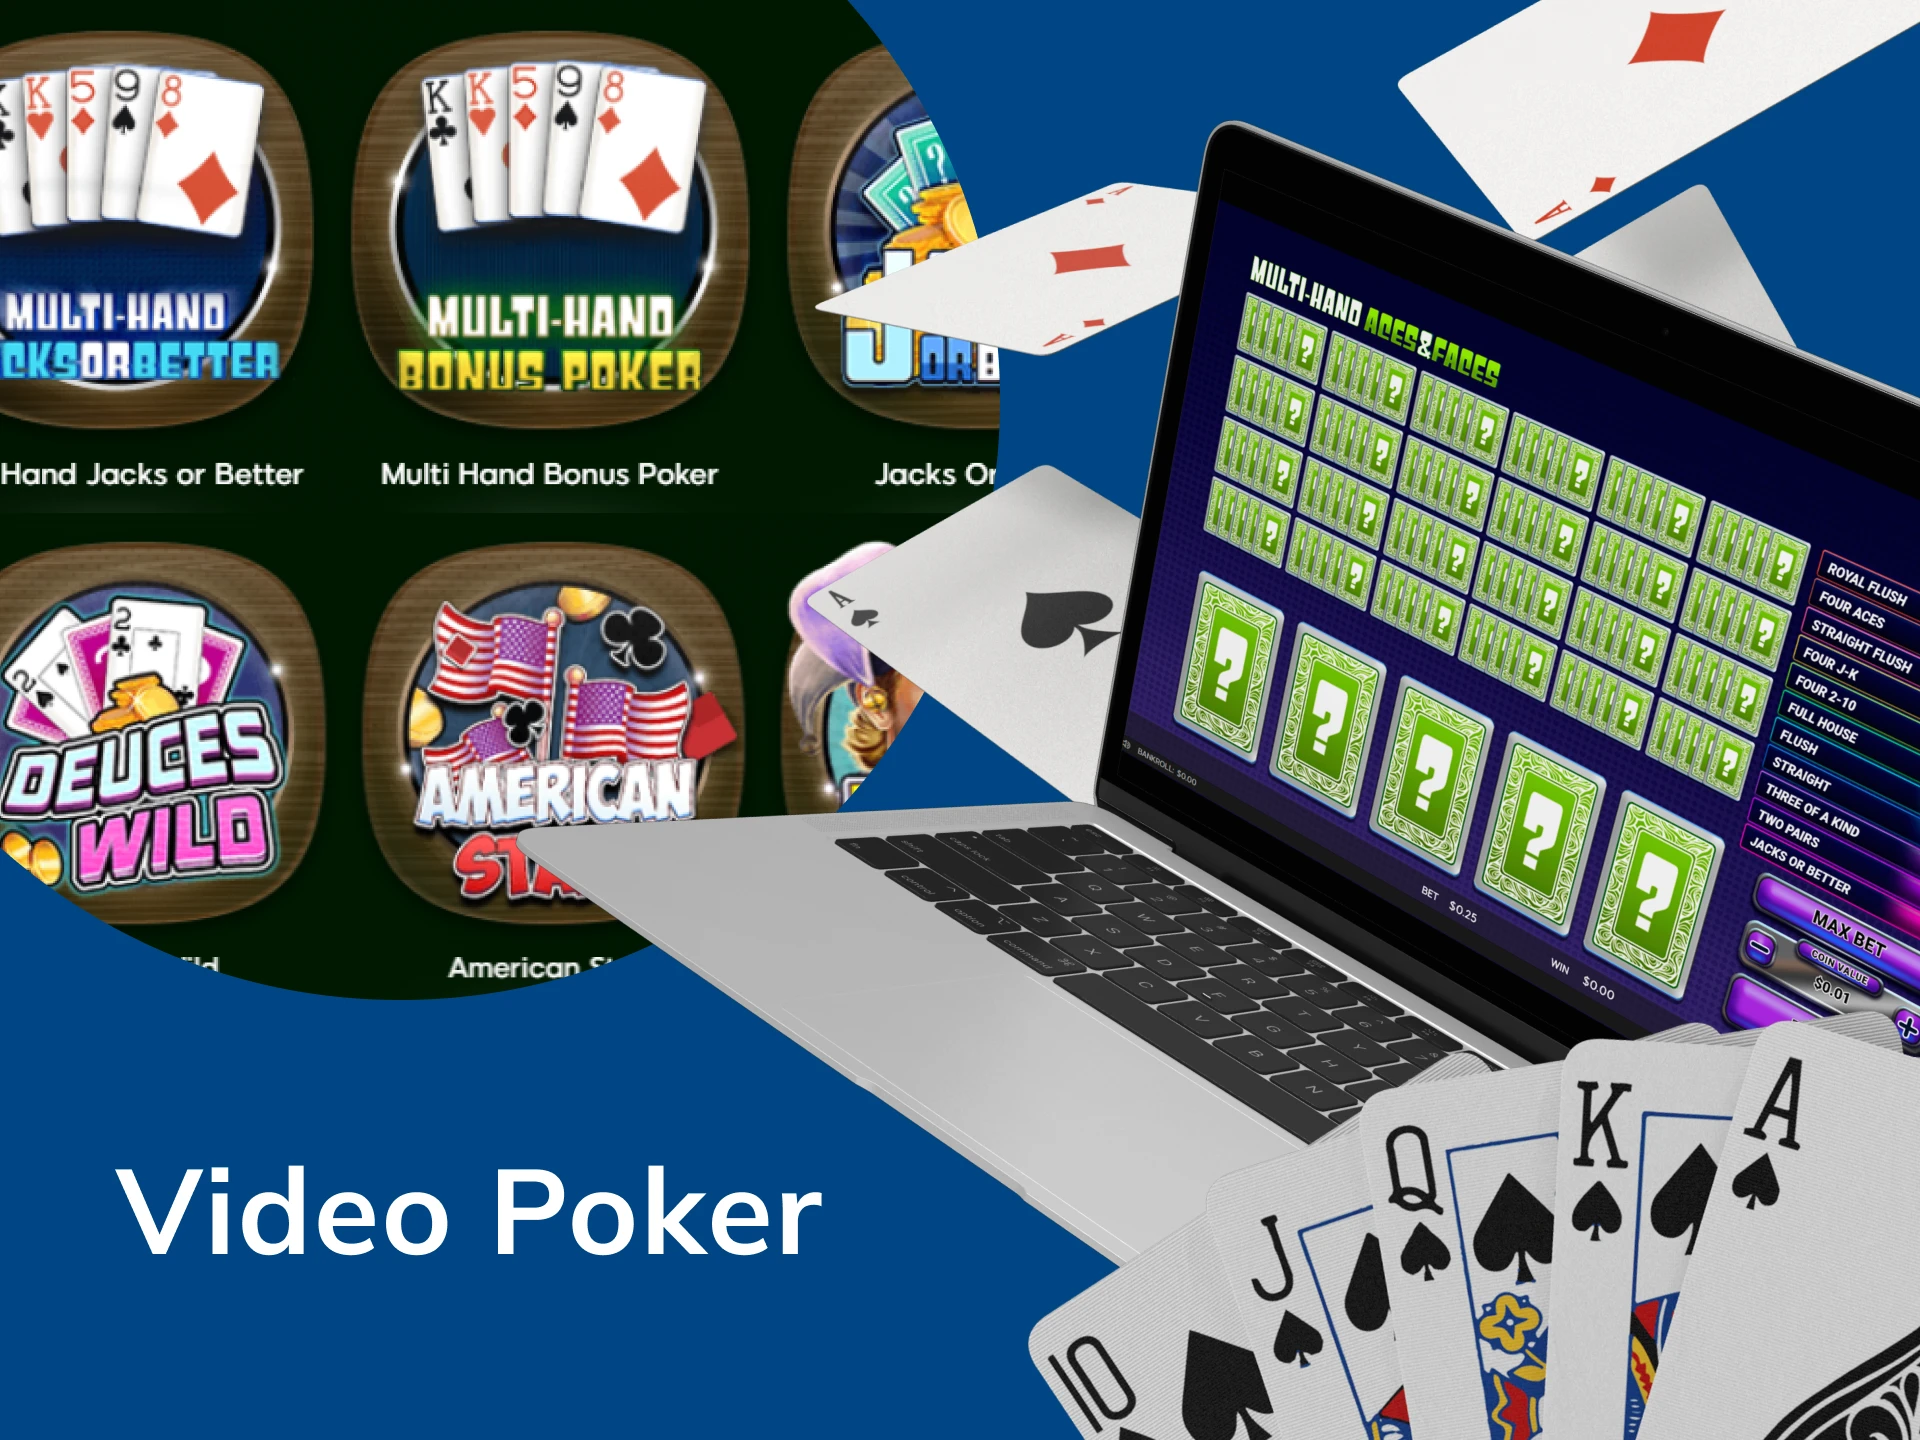 Video poker is the best choice for players who love poker and slot machines.